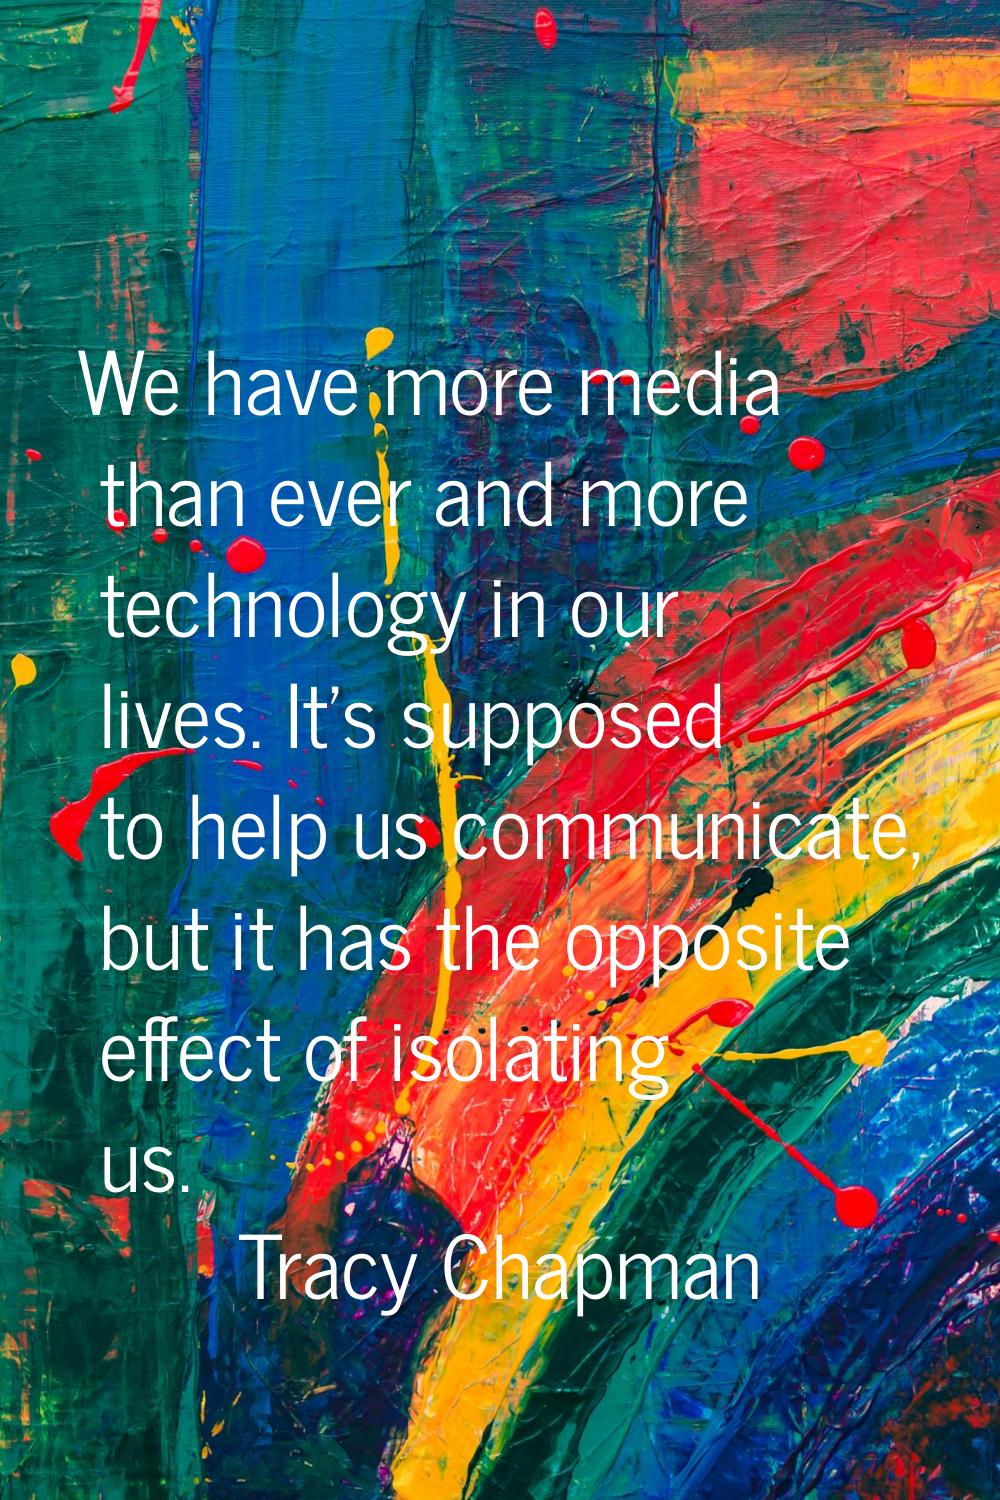 We have more media than ever and more technology in our lives. It's supposed to help us communicate